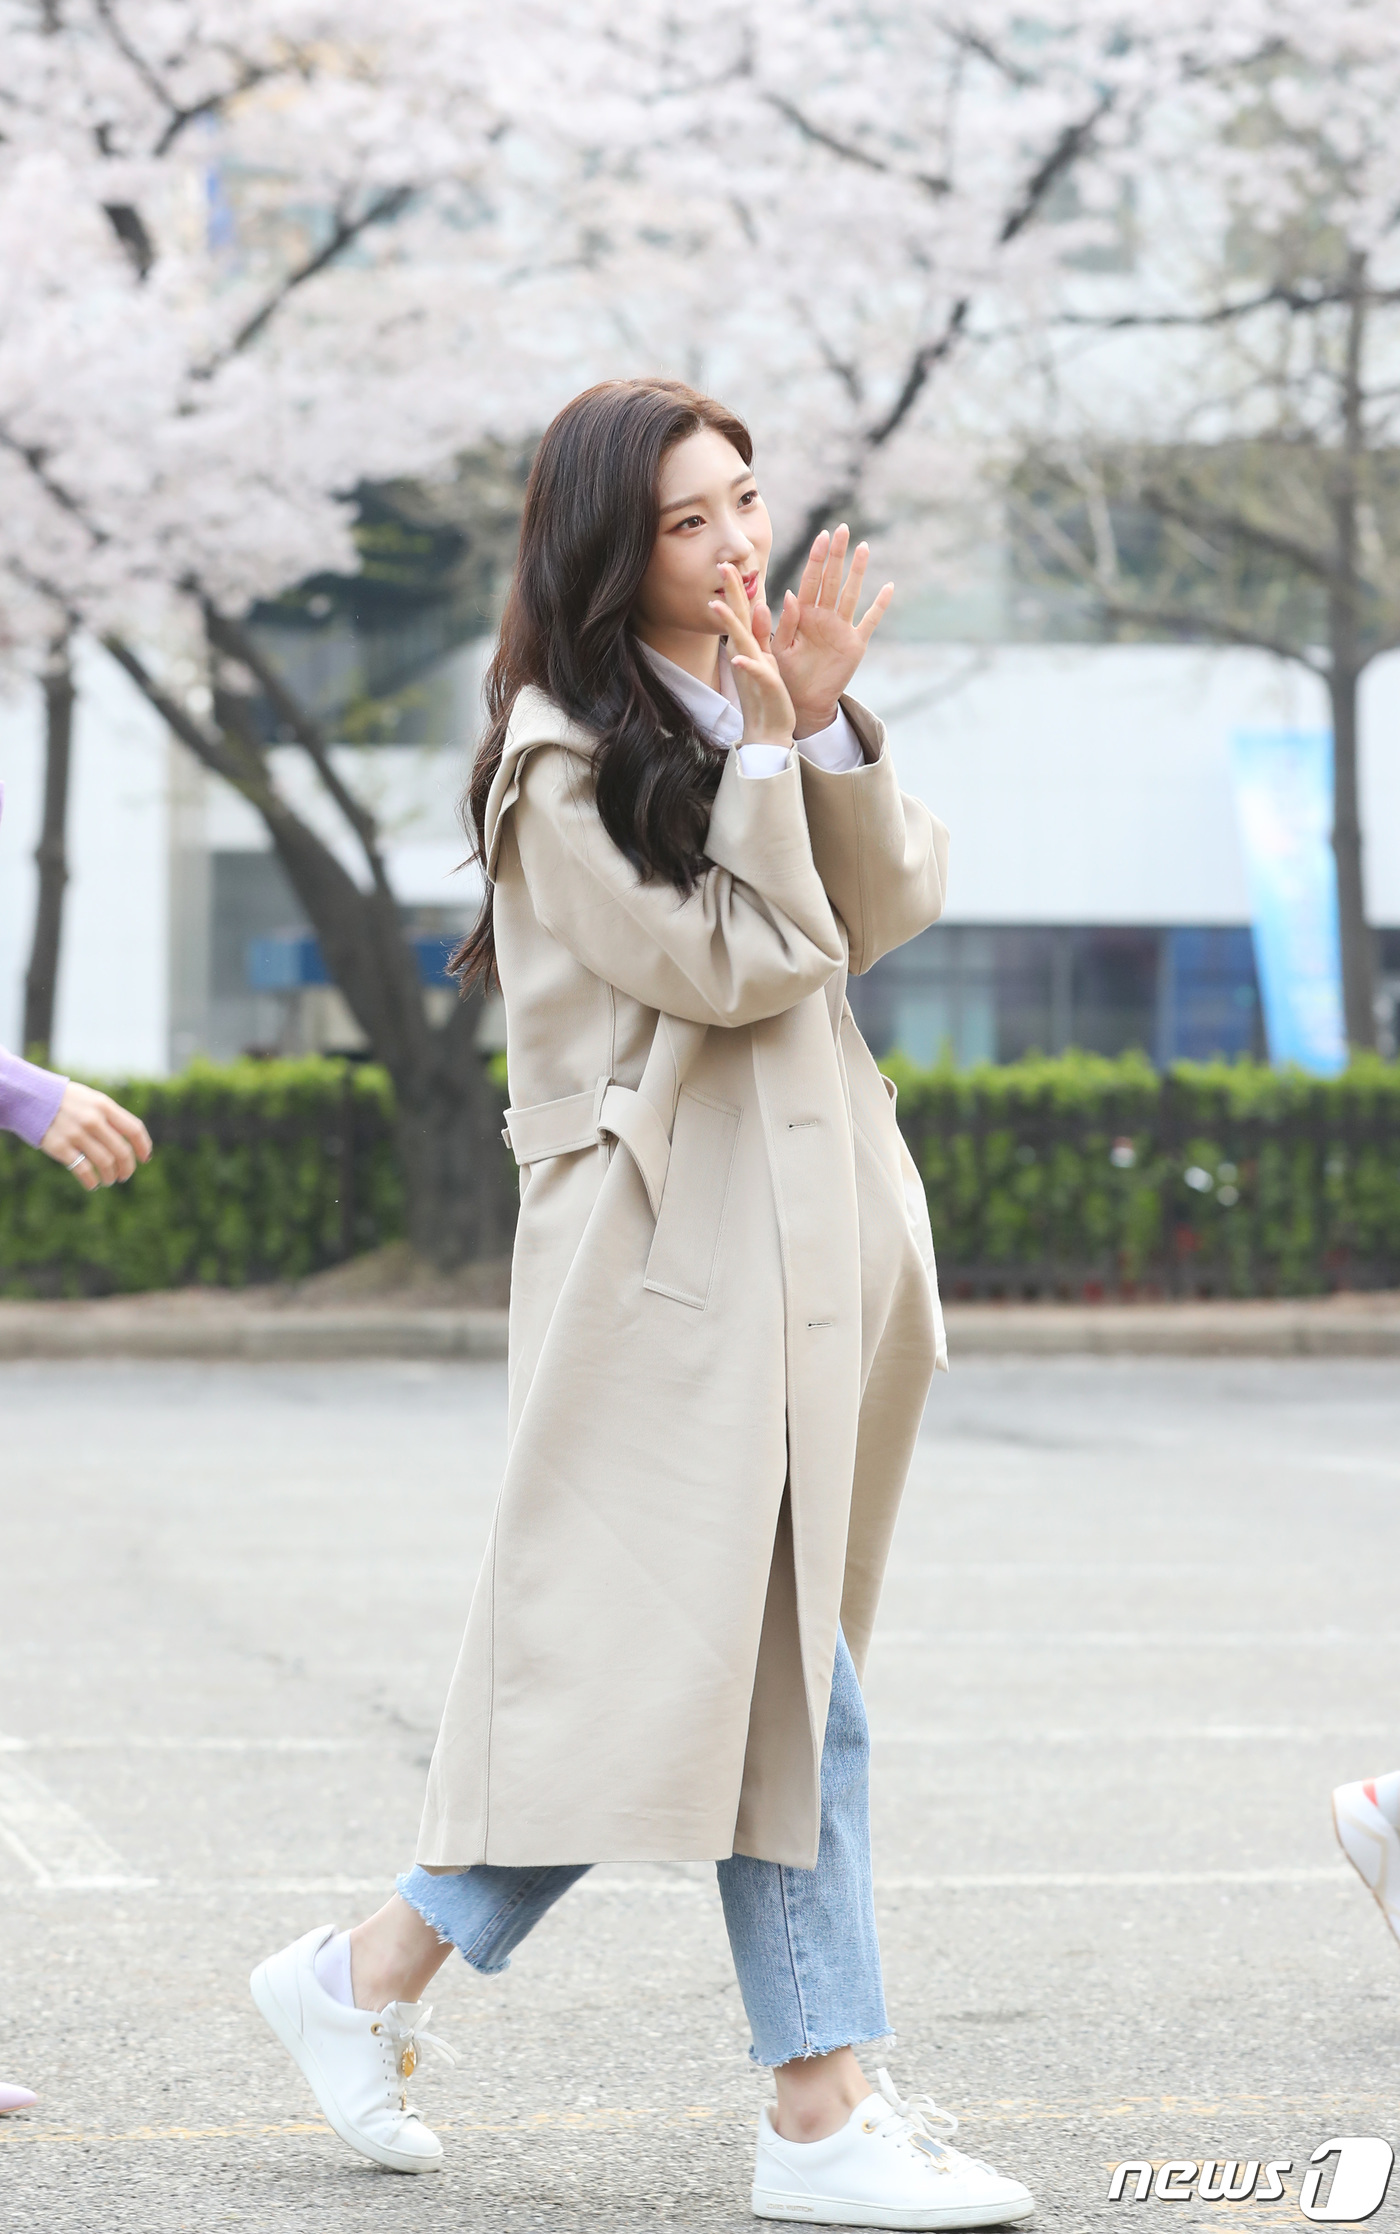 Seoul=) = DIA Jung Chae-yeon attends a rehearsal for KBS2 Music Bank (Mu Bang) at KBS in Yeouido, Seoul, on the morning of the 12th. April 12, 2019.